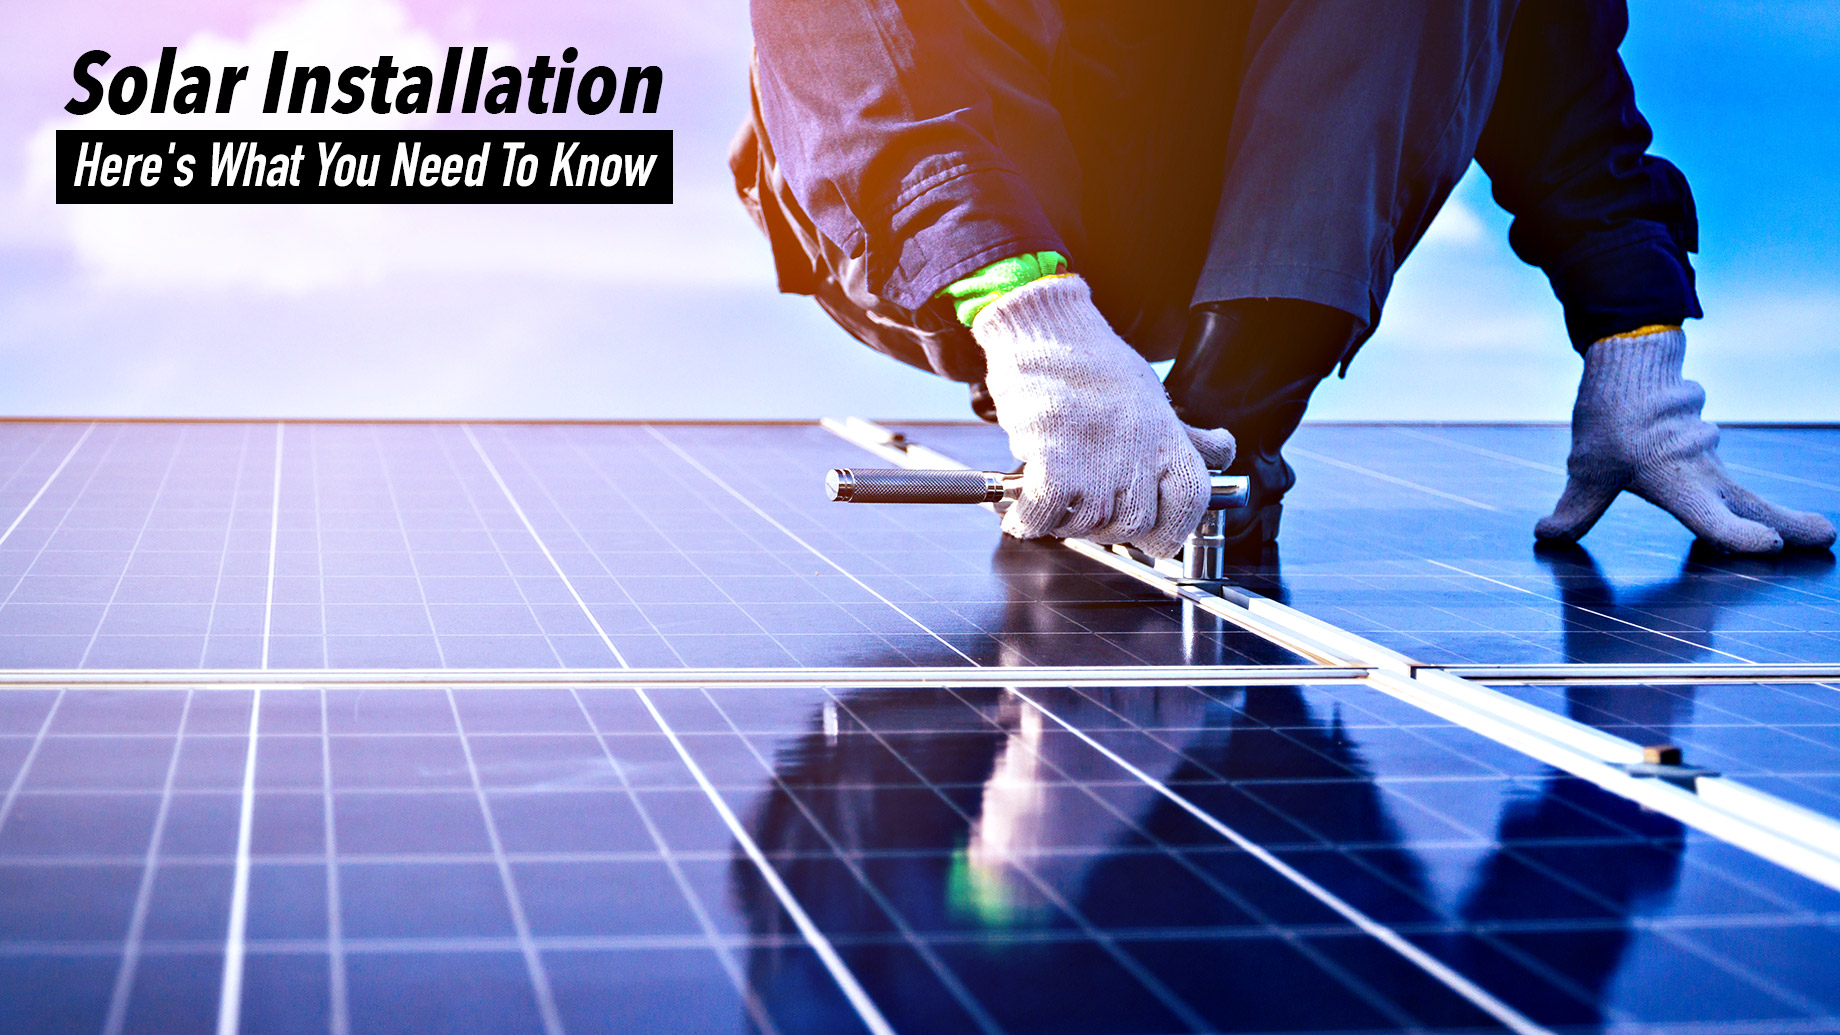 Solar Installation - Here's What You Need To Know